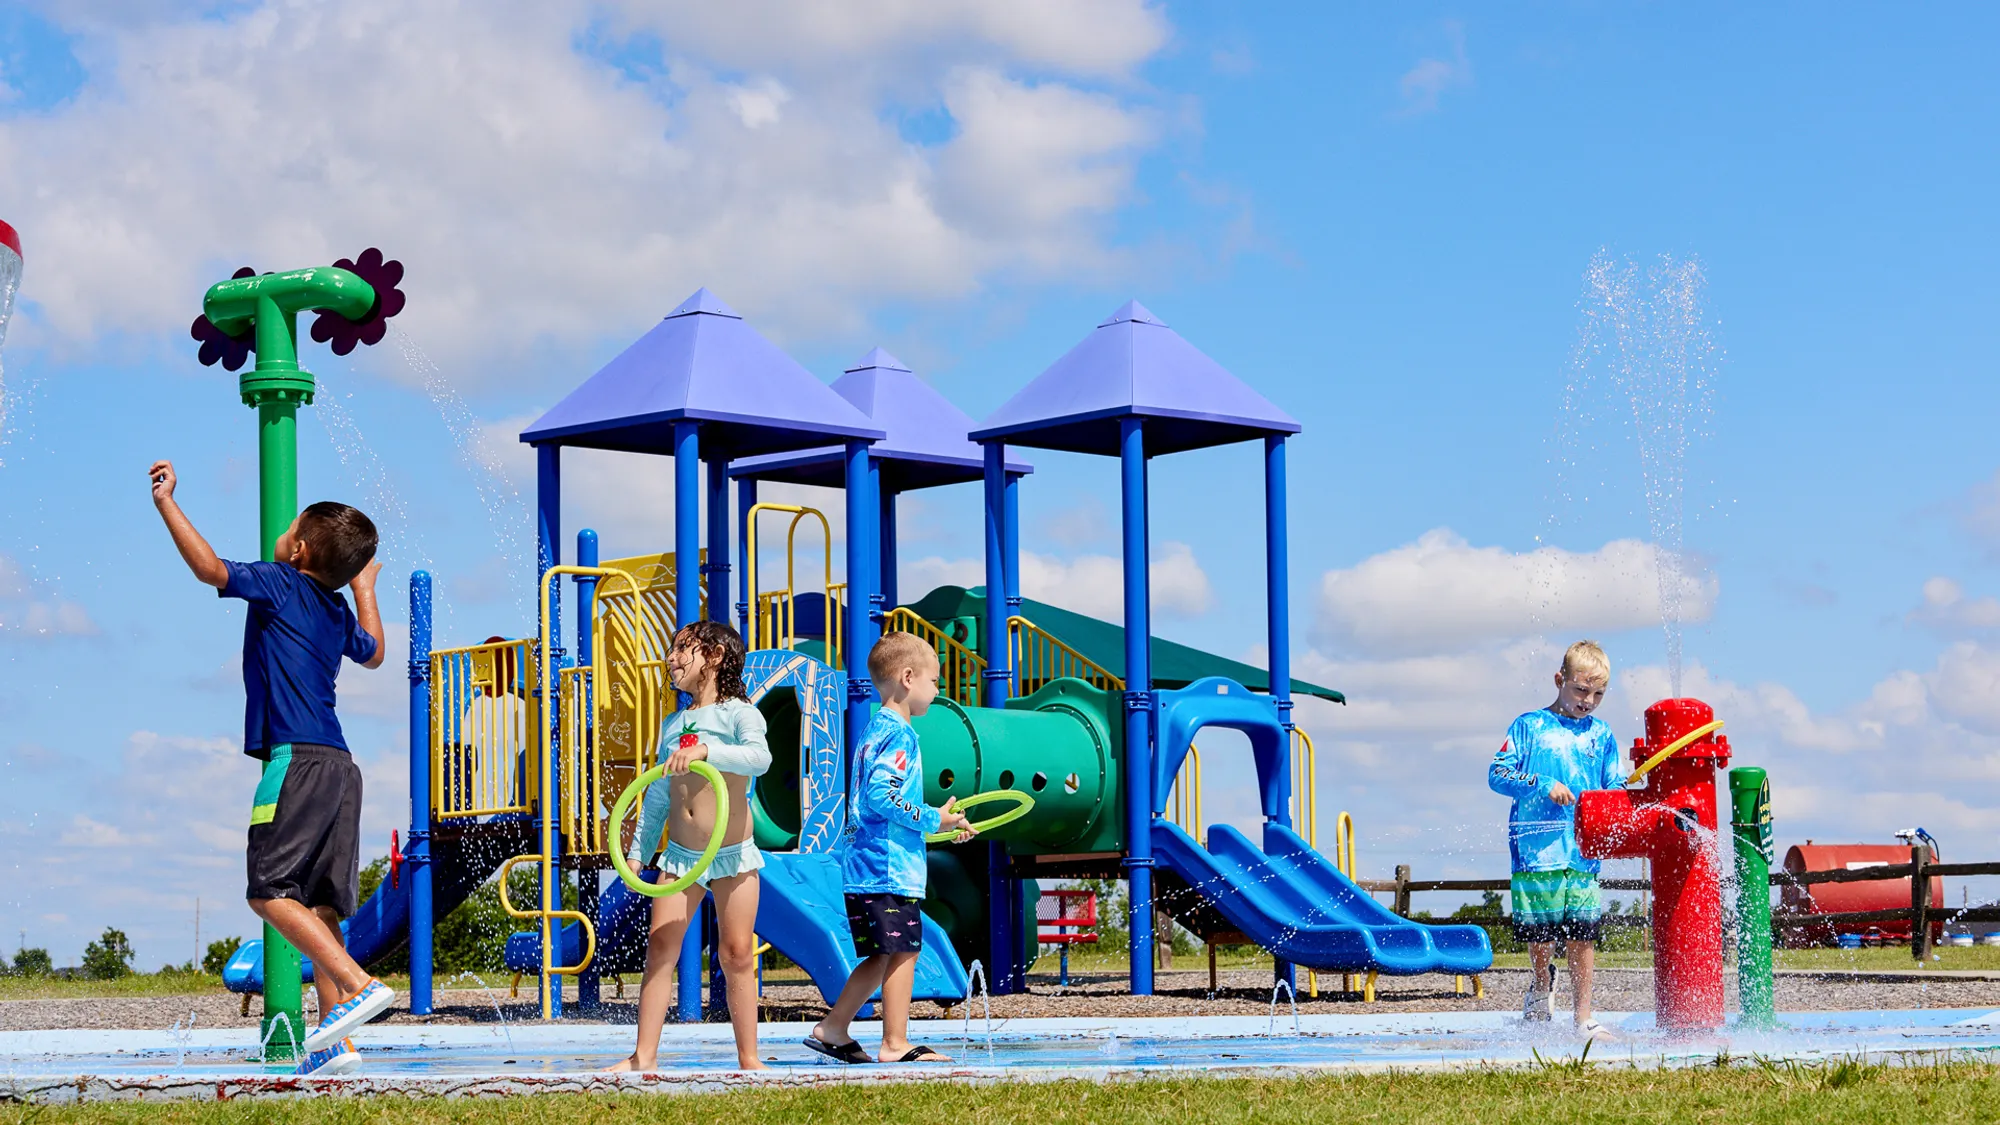  Children at the splashpad and playground in Featherstone - new homes in Moore, OK